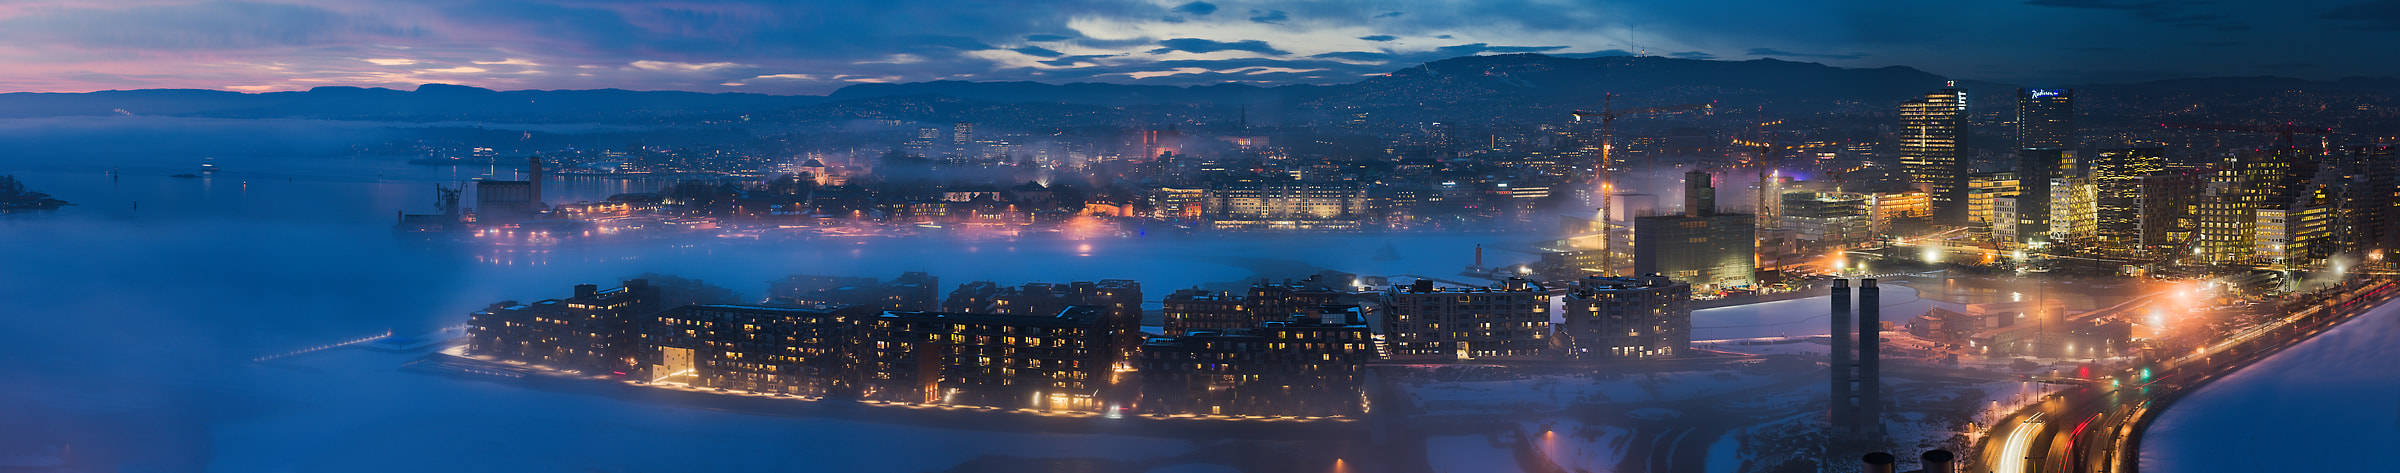 377 megapixels! A very high resolution, panorama VAST photo print of the Oslo city skyline; cityscape photograph created by Ennio Pozzetti in Oslo, Norway.